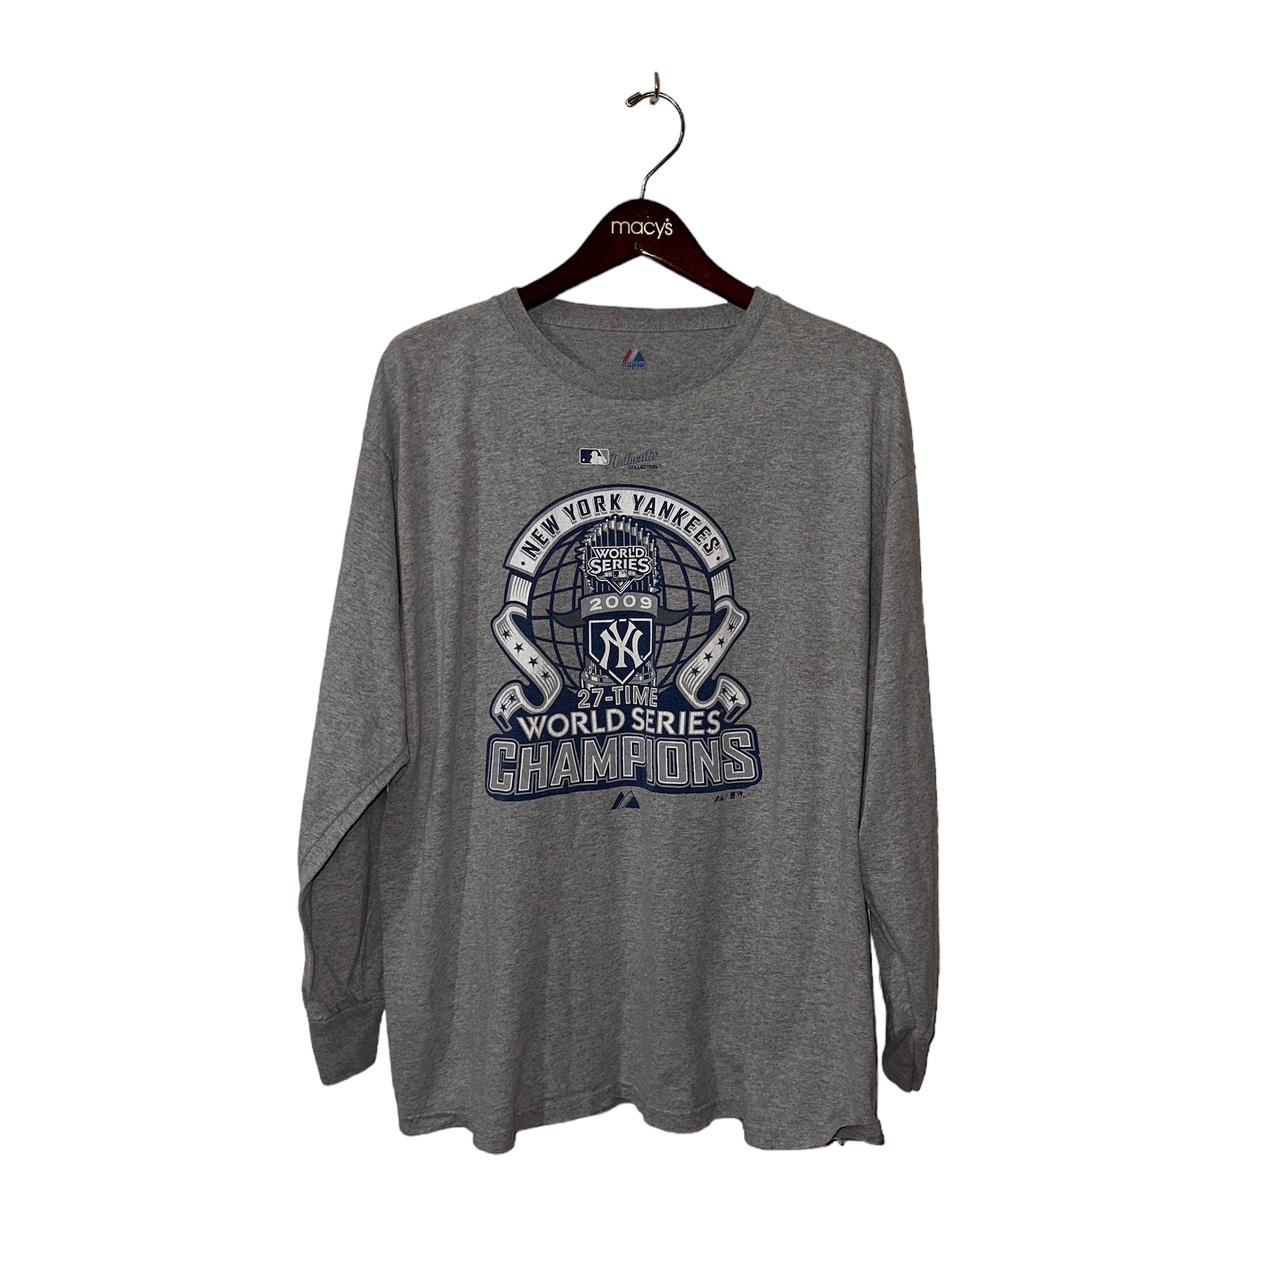 2009 World Series Champions T-Shirt Size XL Magestic The New York Yankees